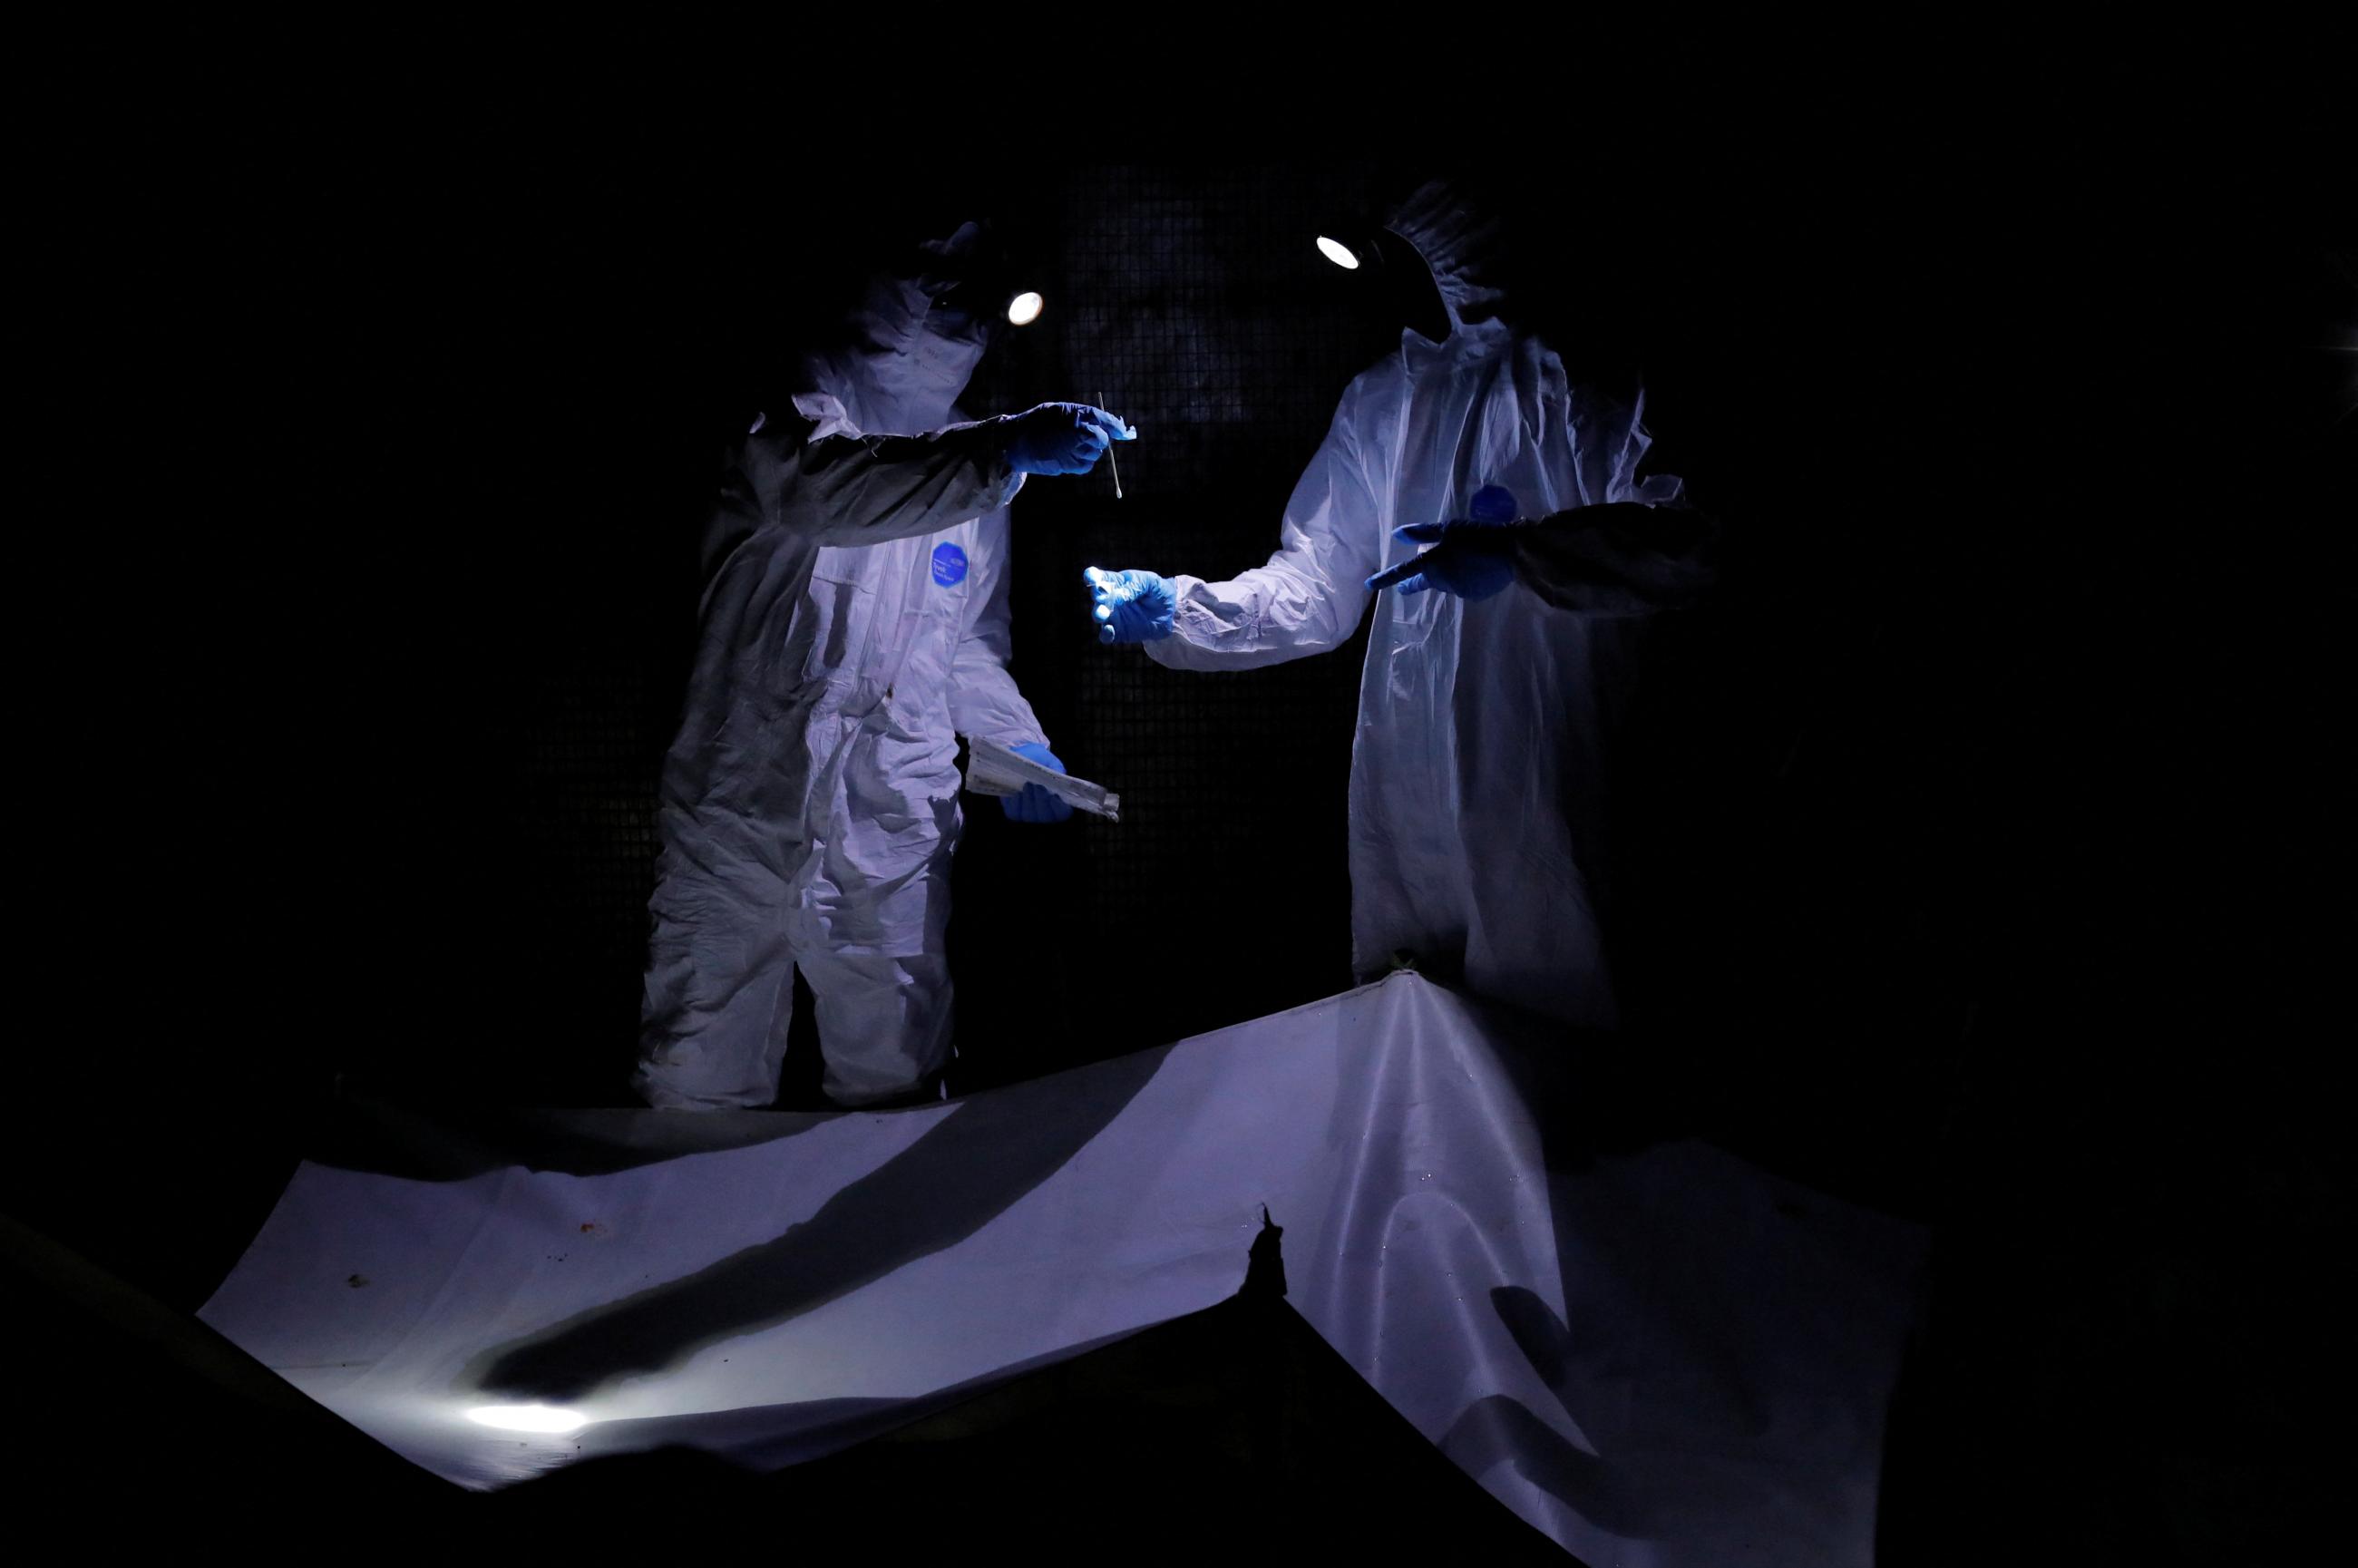 A research team investigating emerging zoonotic diseases collects samples from a bat breeding shed in Accra, Ghana, August 19, 2022.